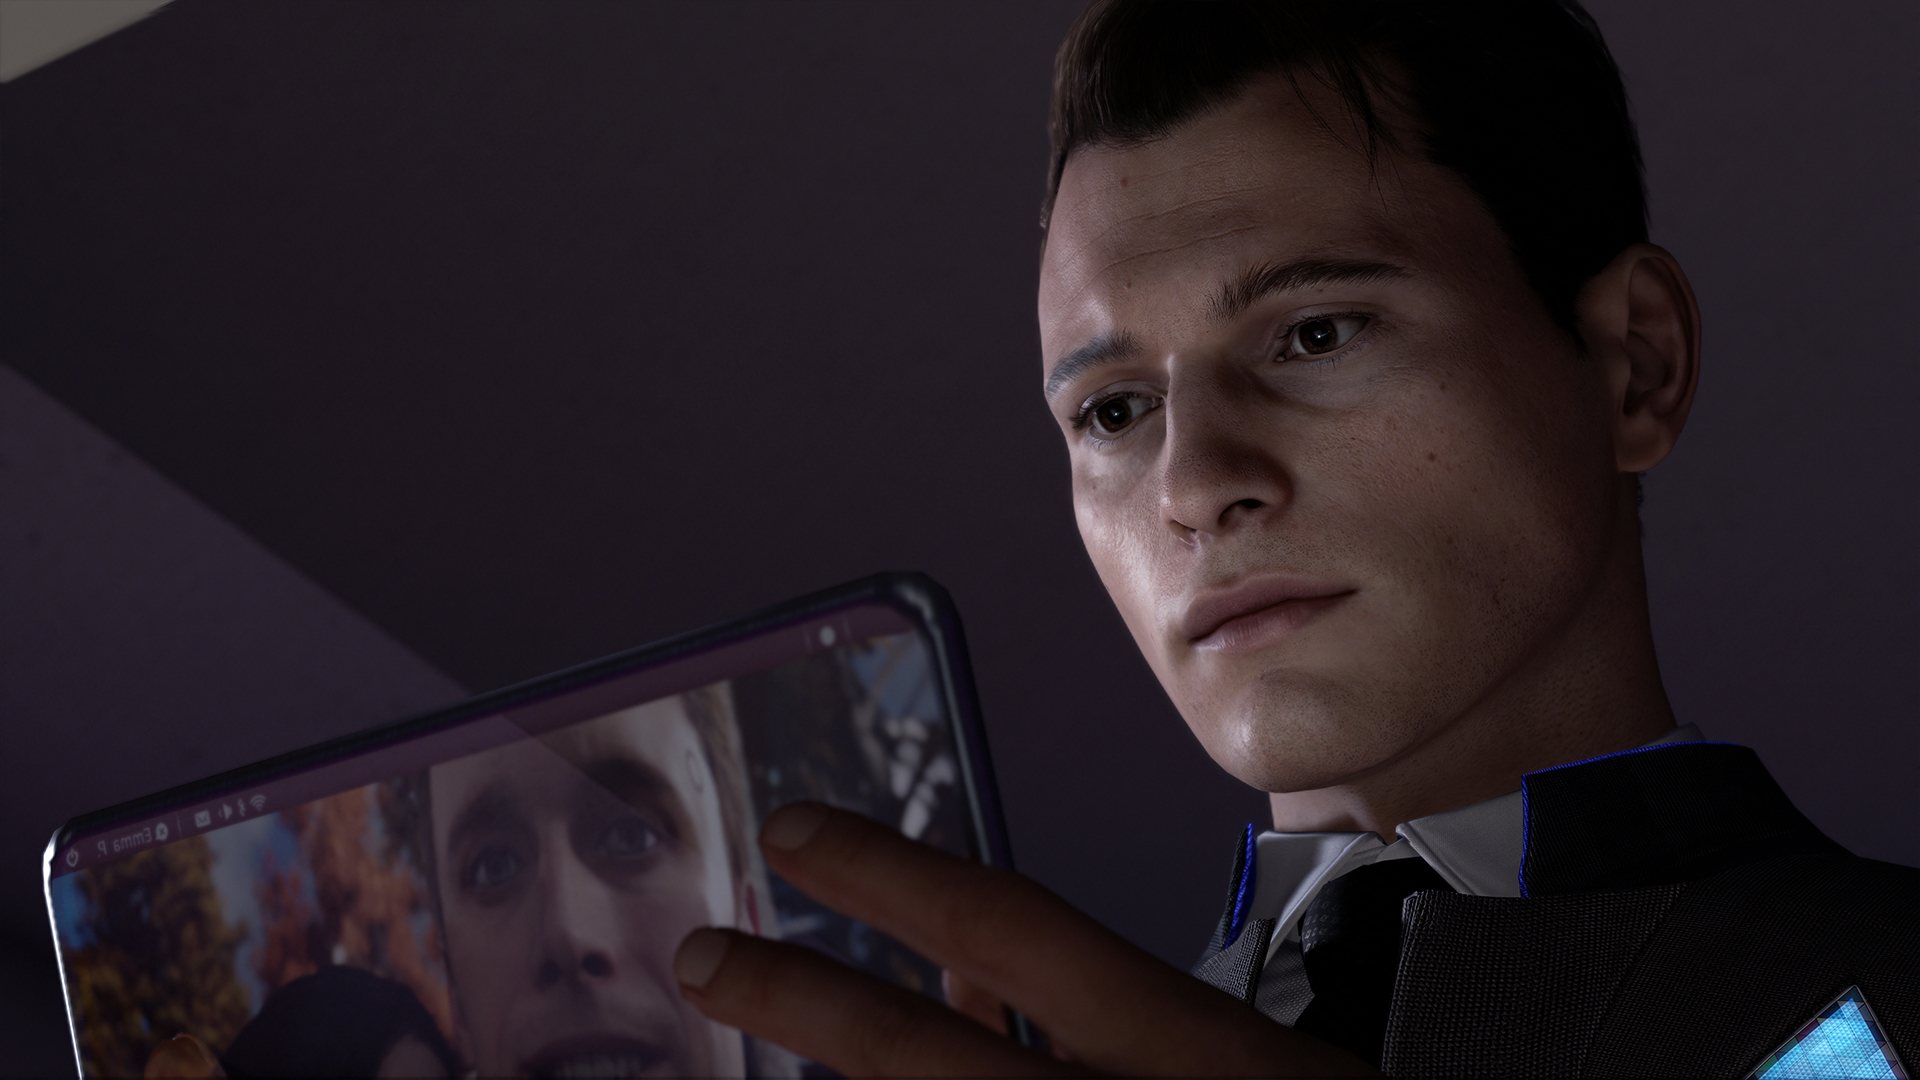 Detroit: Become Human accessibility review - Can I Play That?